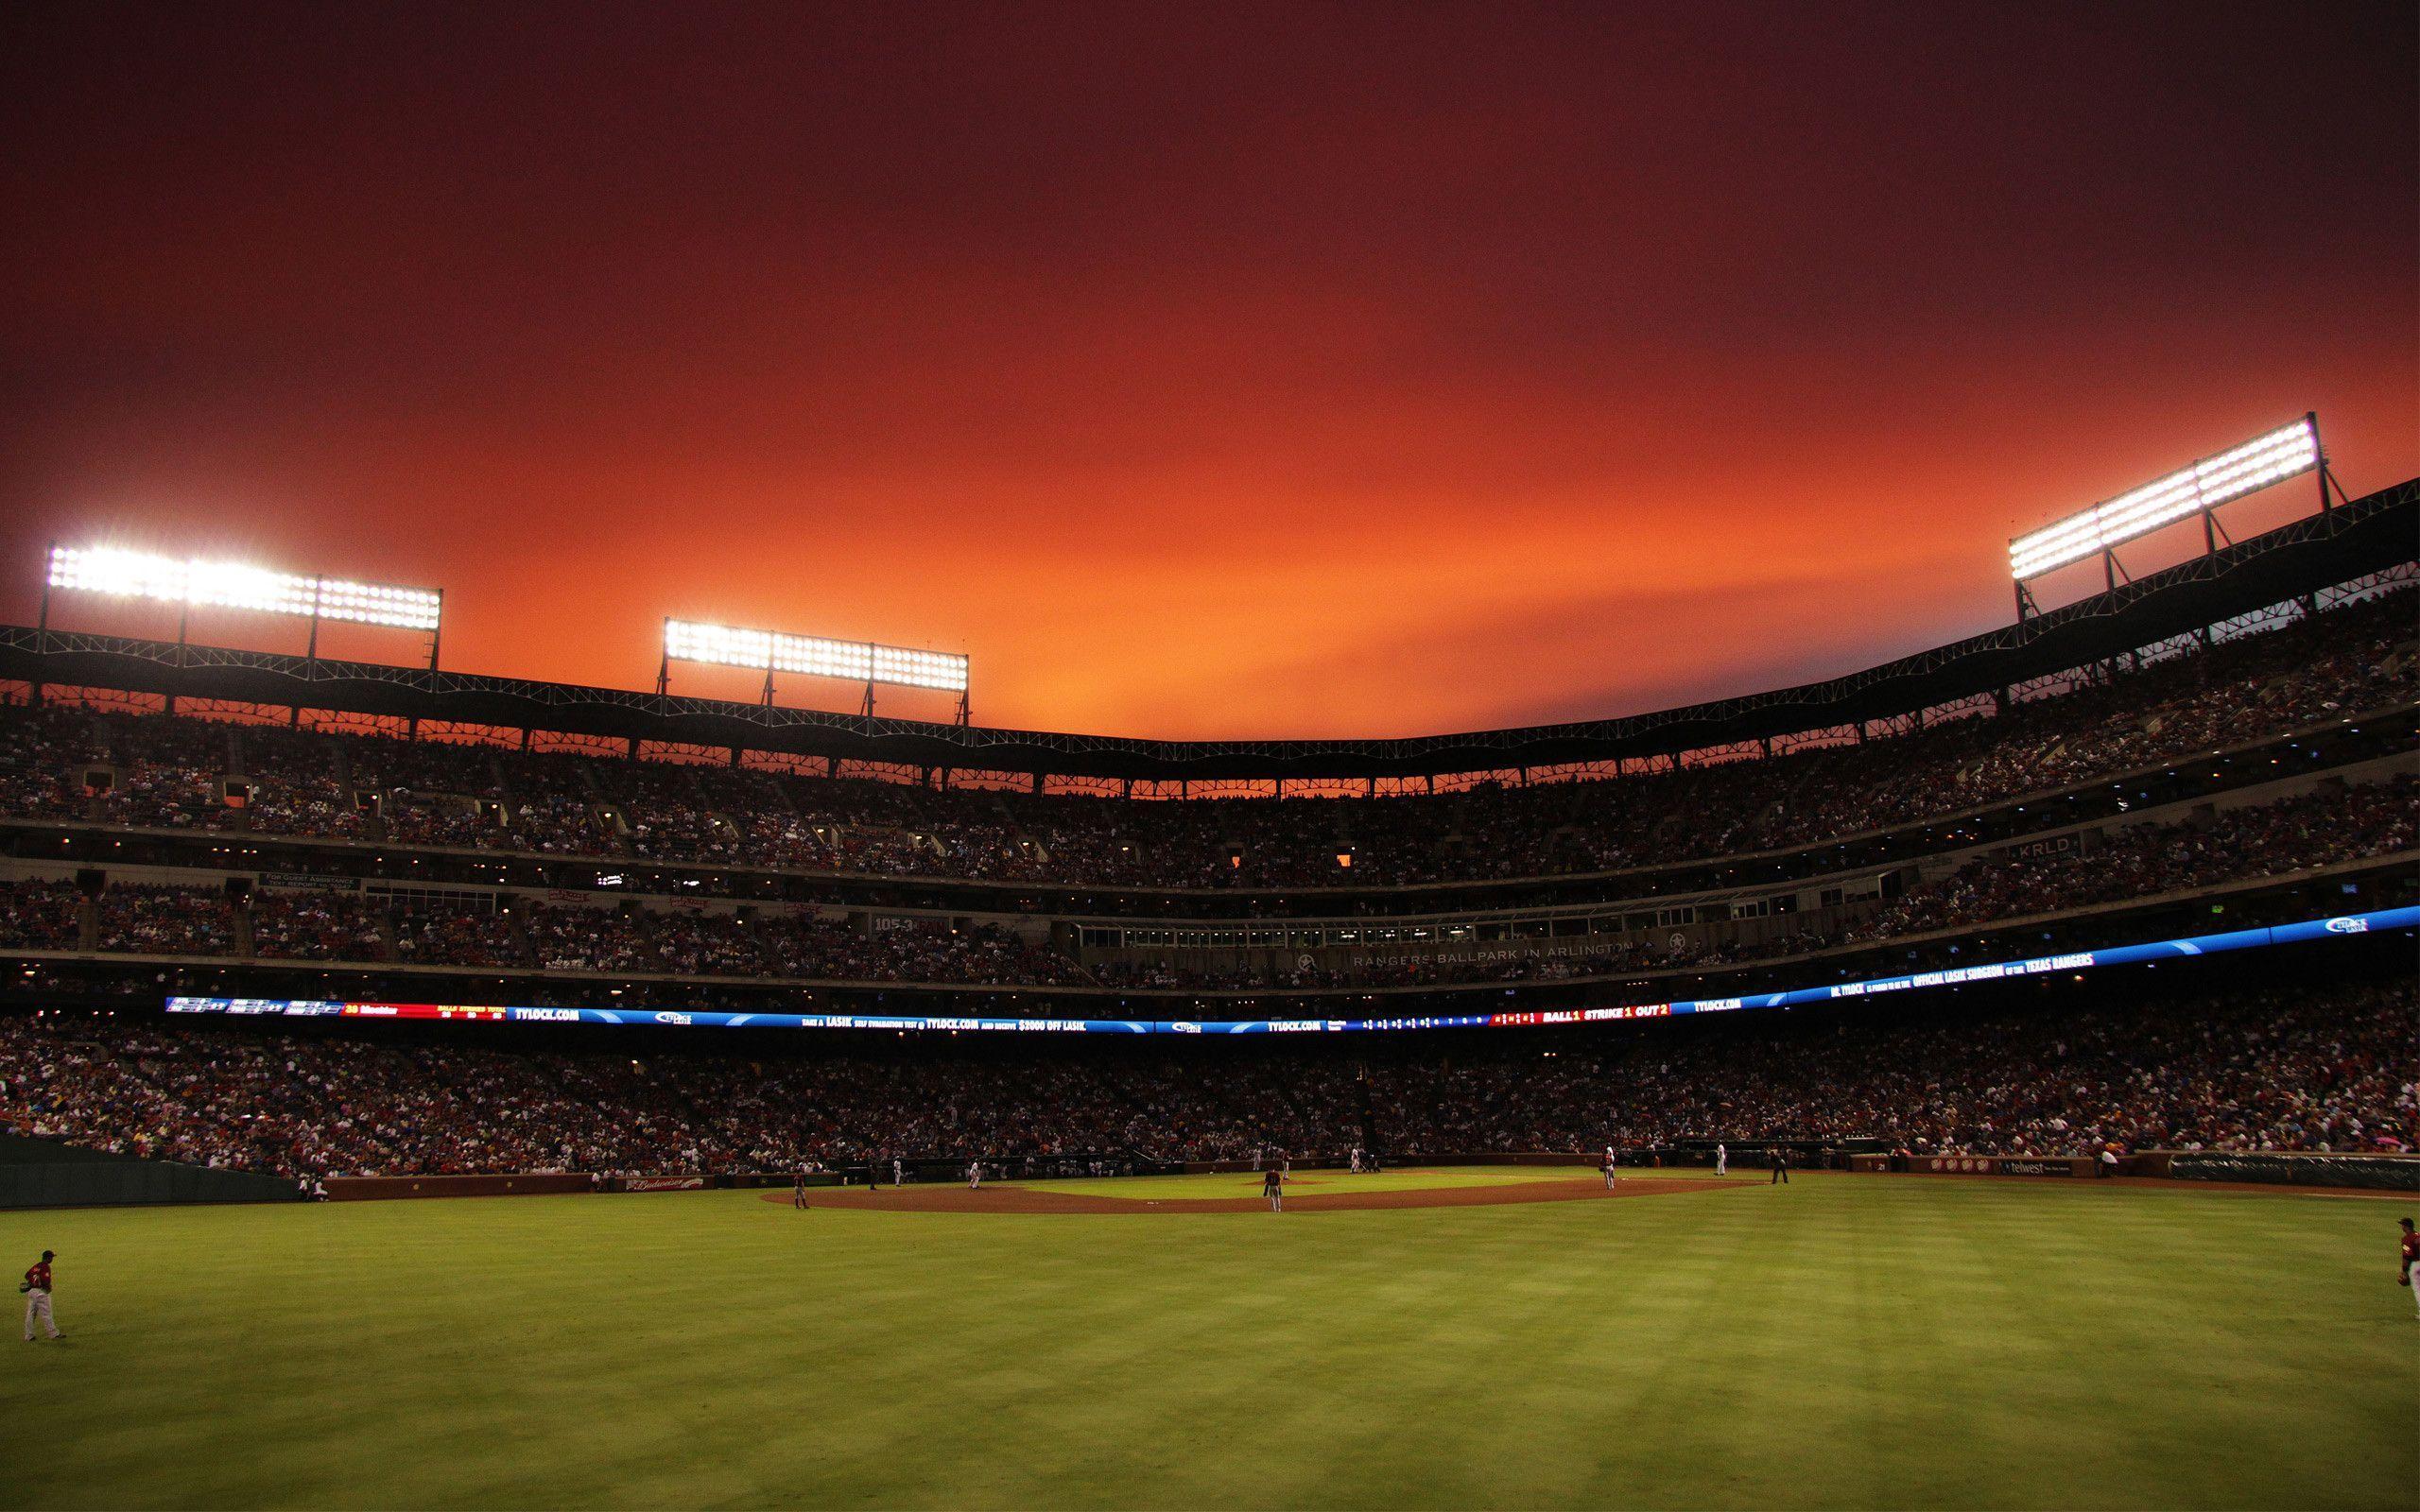 Baseball Field Photos Download The BEST Free Baseball Field Stock Photos   HD Images